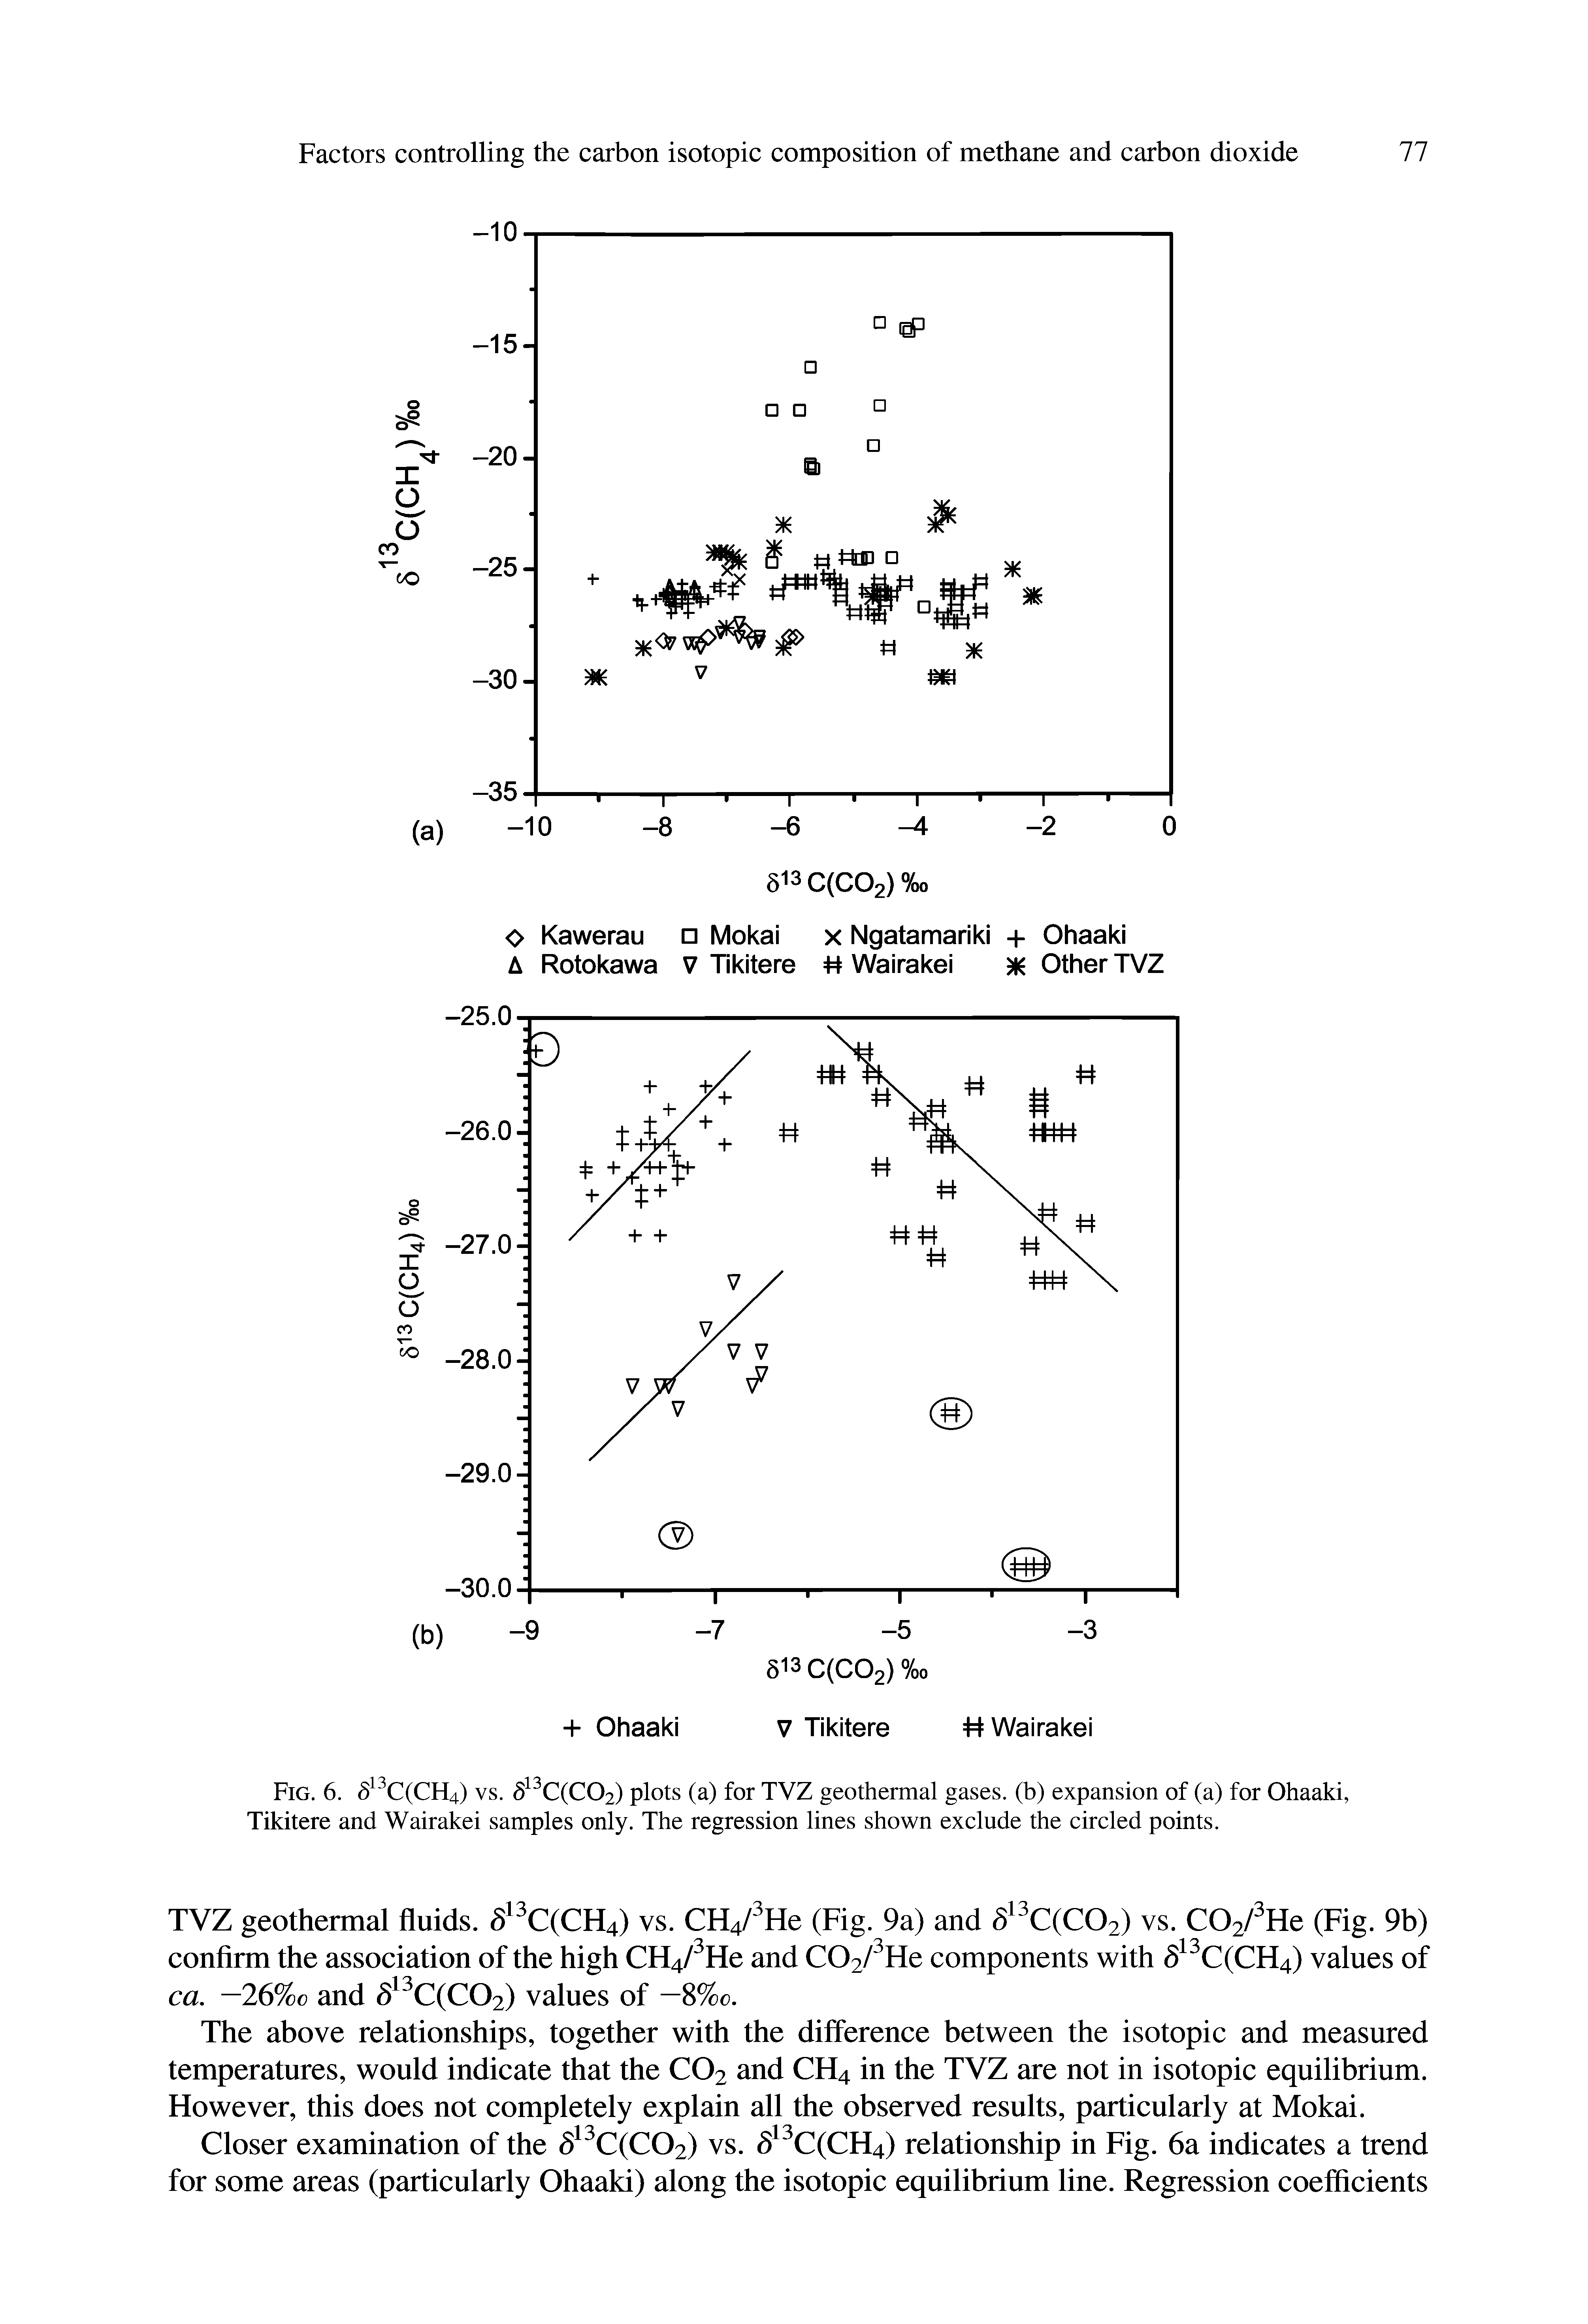 Fig. 6. 6 C(CH4) vs. 5 C(C02) plots (a) for TVZ geothermal gases, (b) expansion of (a) for Ohaaki, Tikitere and Wairakei samples only. The regression lines shown exclude the circled points.